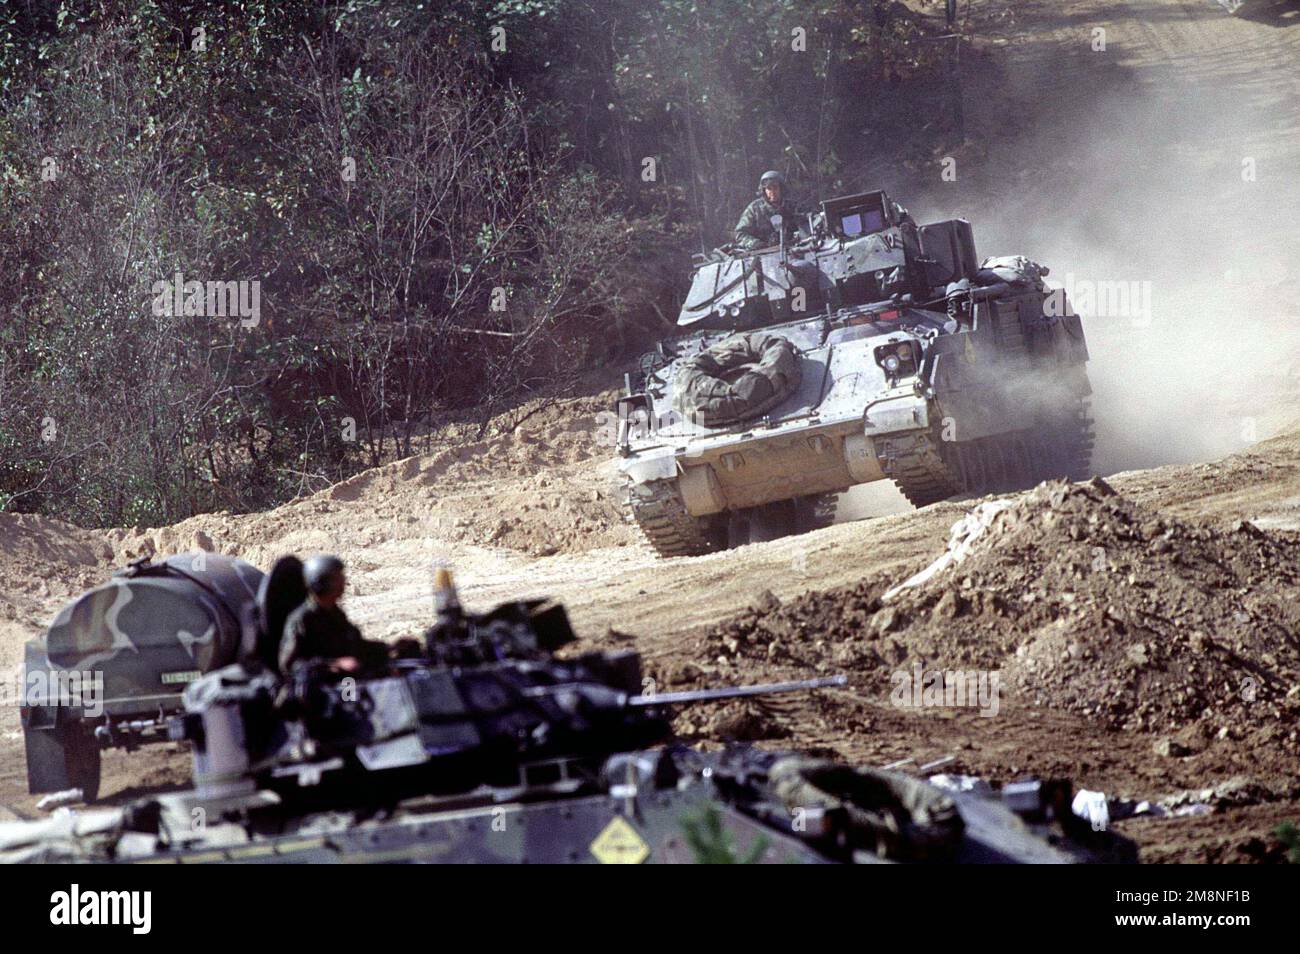 Several US Army M2/A2 Bradley Fighting vehicles, assigned to C Troop of the 4th Squadron, 7th Cavalry Regiment drive to the live fire range for gunnery training at the Korea Training Center, Republic of Korea on Oct. 25, 1998. The center is manned throughout the year and various armored units rotate through training scenarios to meet yearly live gunnery training requirements. Subject Operation/Series: KOREA CD Base: Korea Training Center Country: Republic Of Korea (KOR) Stock Photo